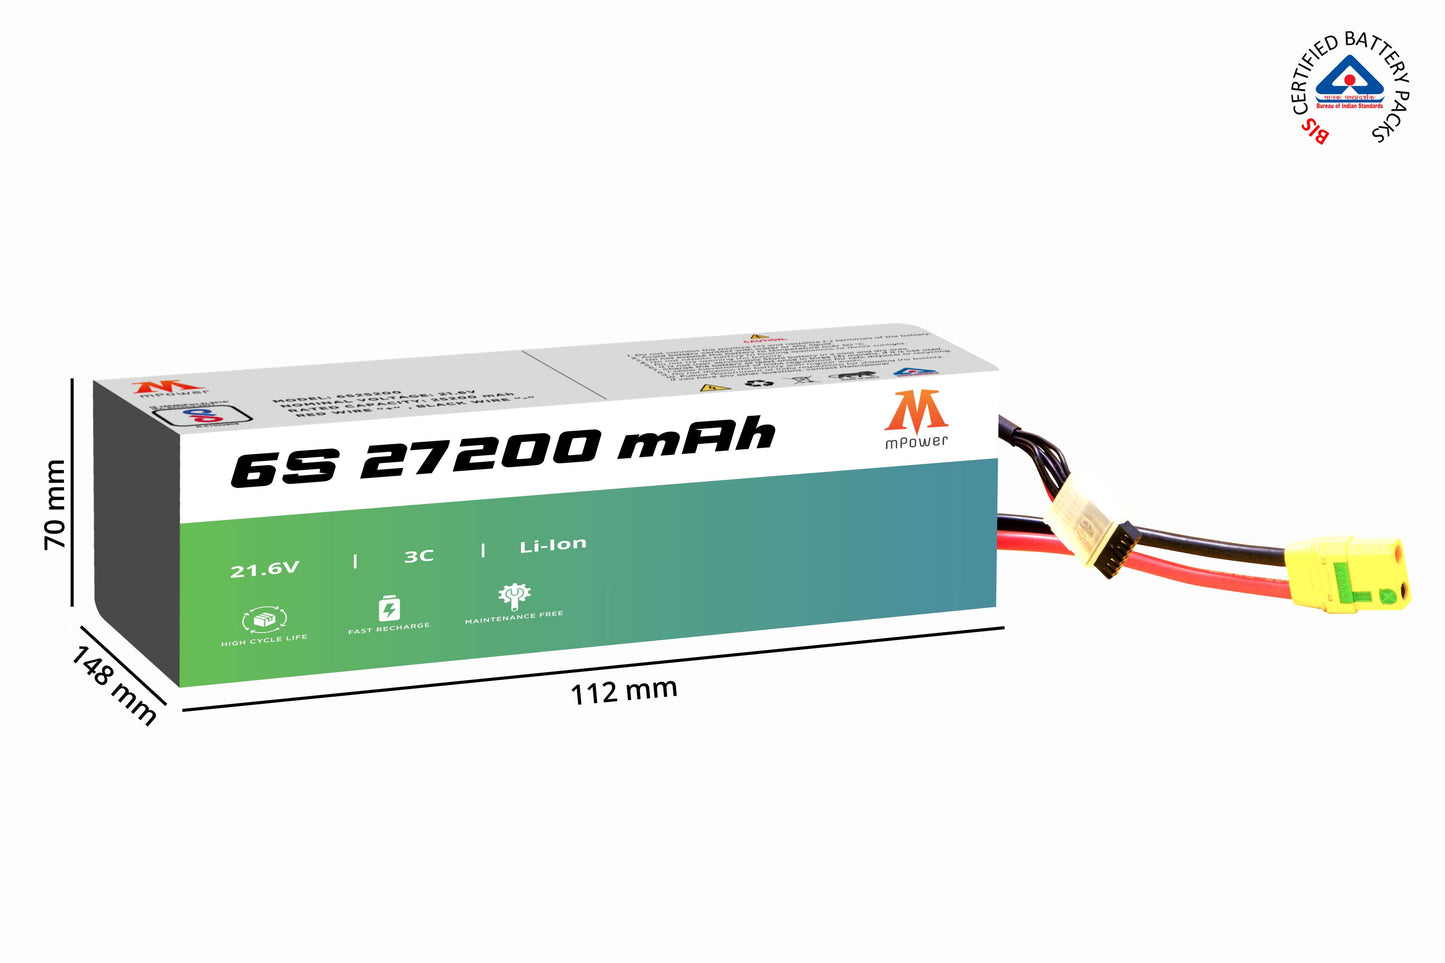 mPower 6S 27200mAh Lithium-Ion Battery for Surveillance Drones